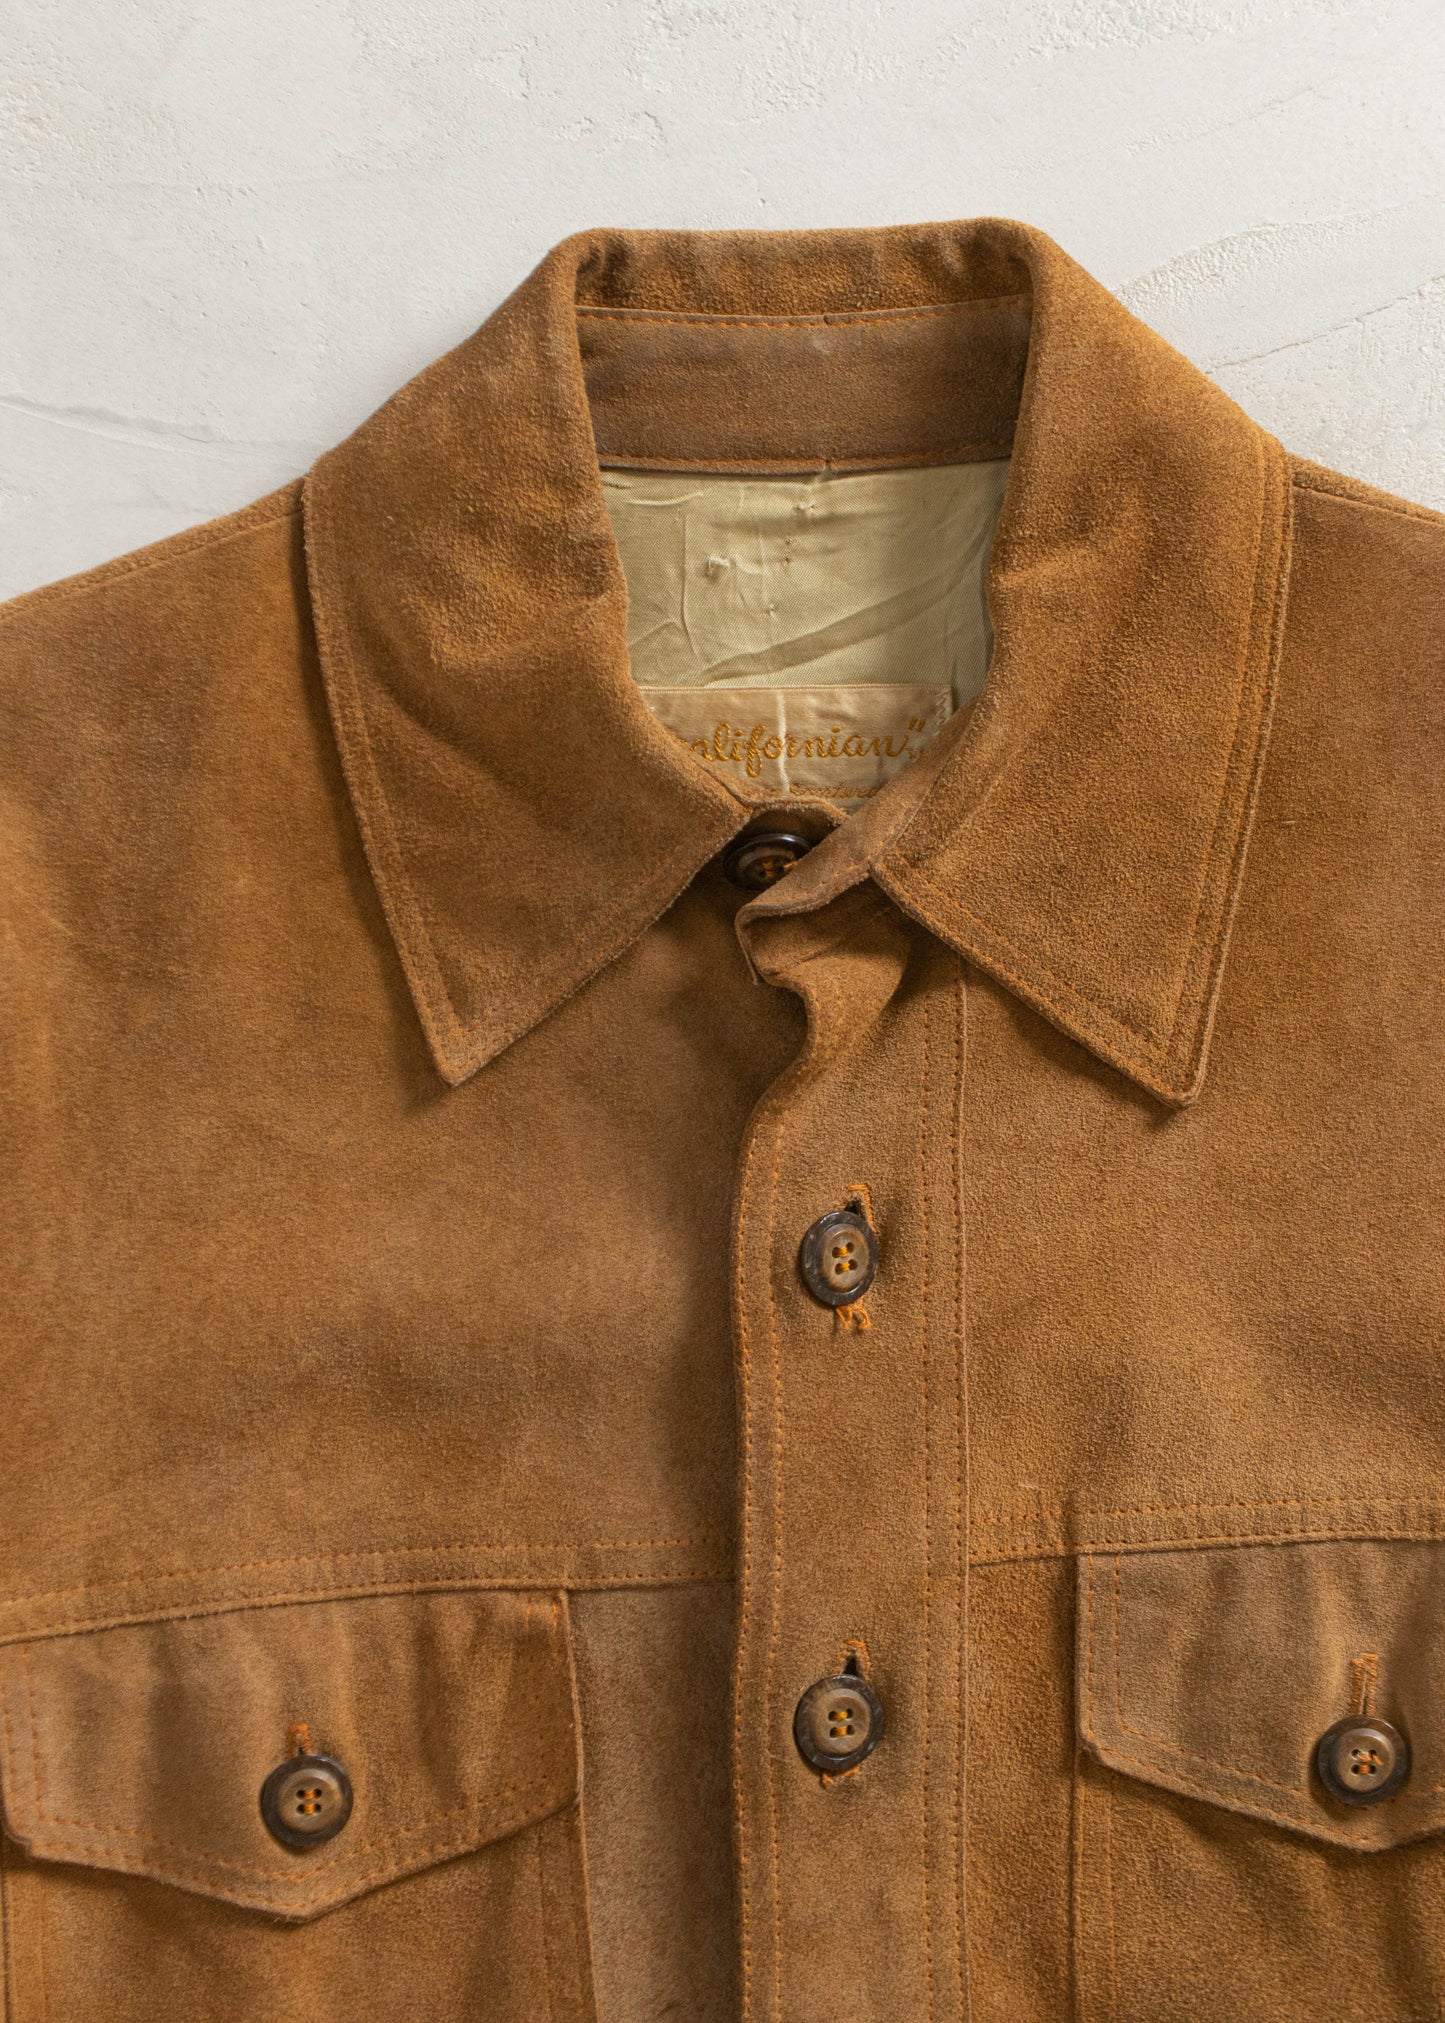 Vintage 1970s Californian by California Sportswear Co. Suede Button Up Jacket Size S/M